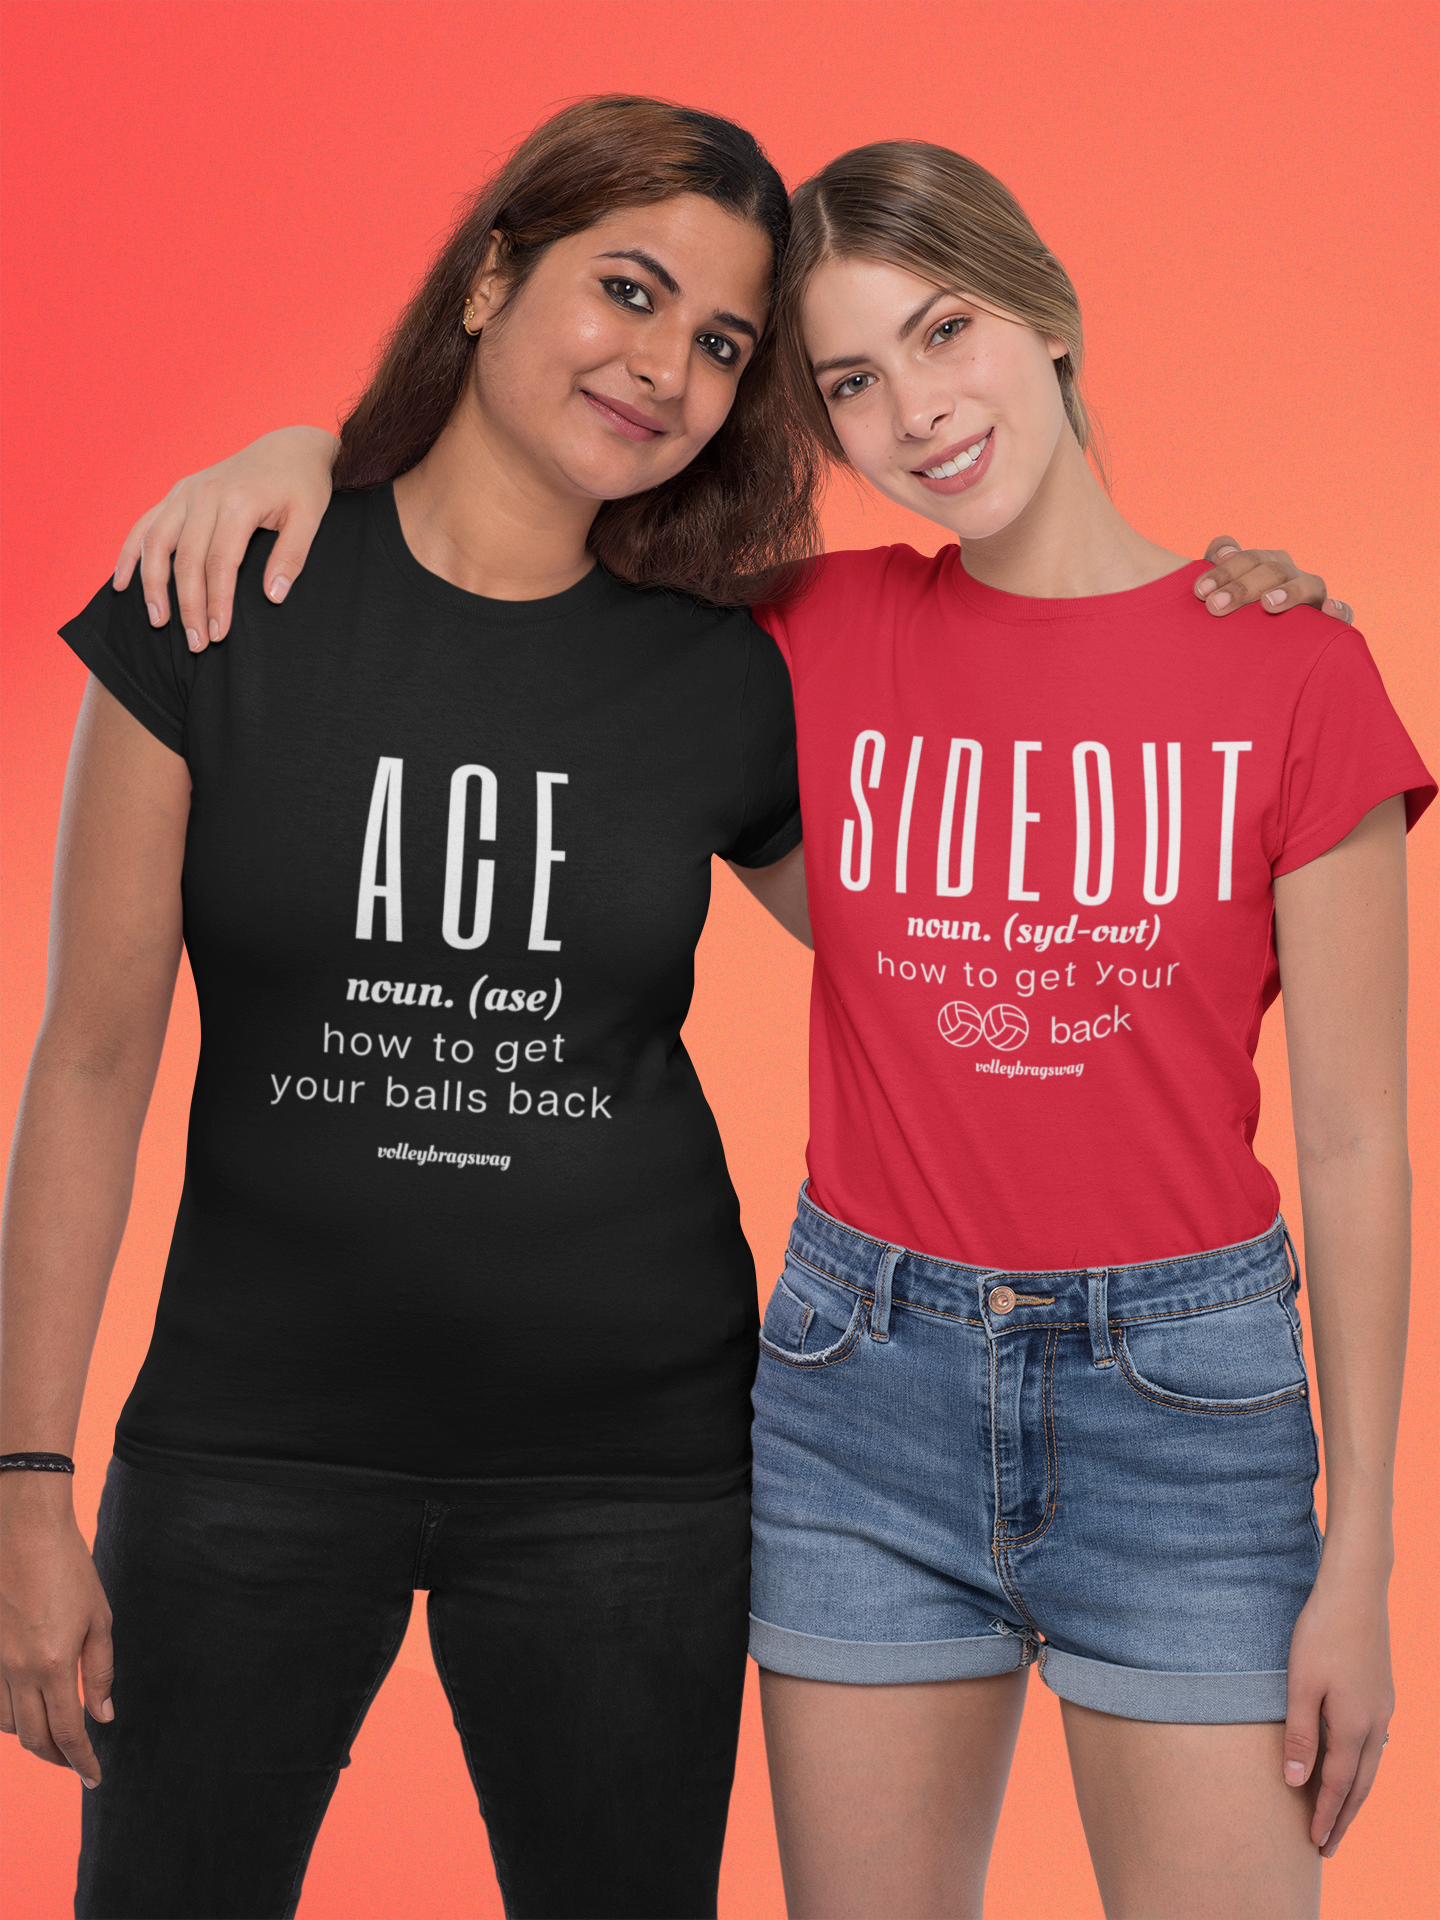 Volleyball Slang Terms: Sideout How to Get Your Balls Back volleyball shirt. April Chapple, Launches a Hilarious Volleyball T-shirt Line With Fun Tongue-in-Cheek Designs sure to make players and enthusiasts laugh.